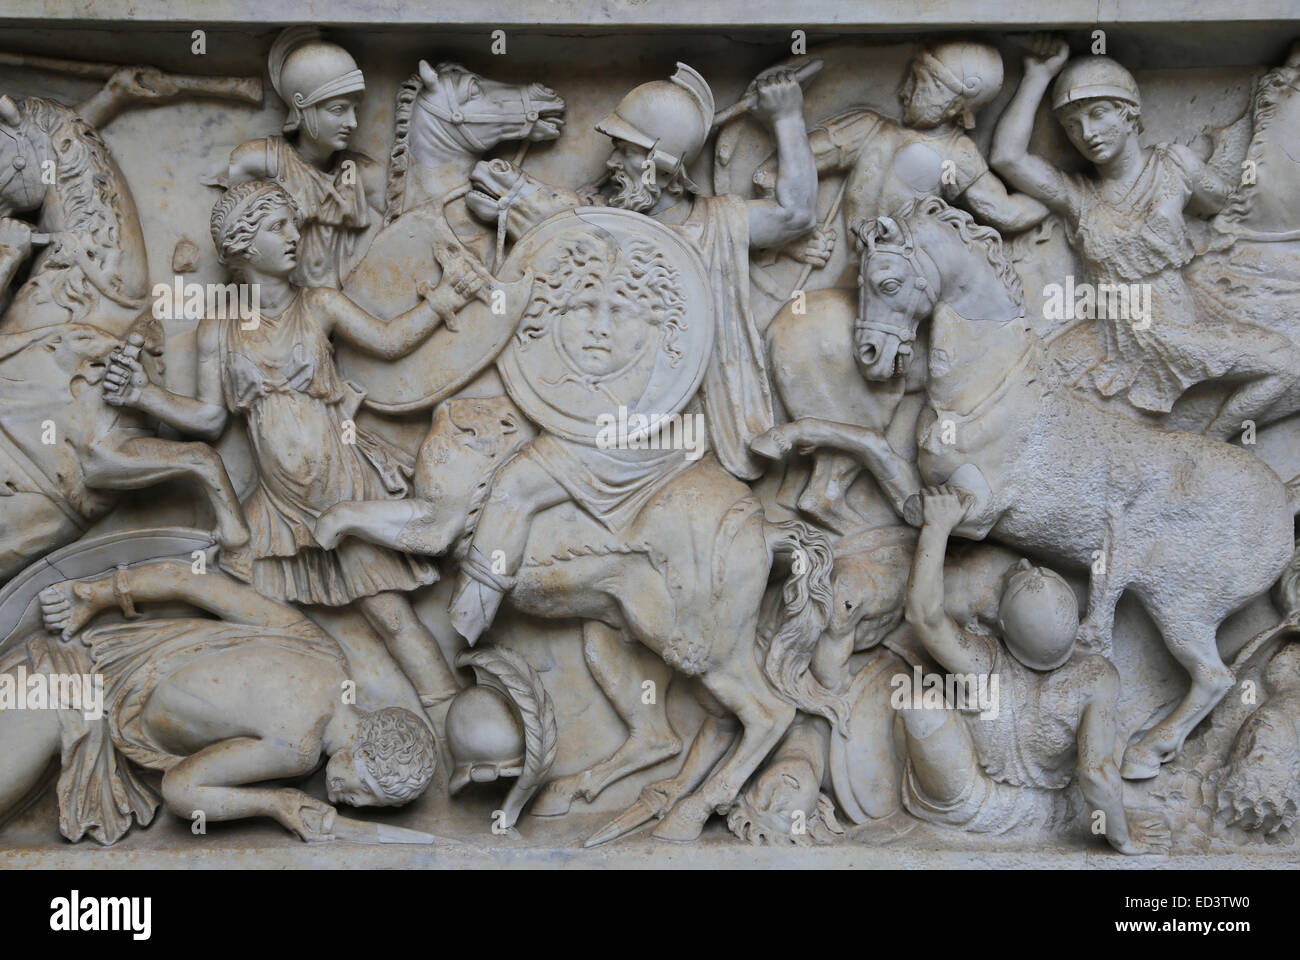 Imperial Roman era. Basin of sculpture of a river god Arno. Sarcophagus. 170-180 AD. Battle. Amazons and Greeks. Vatican Museums Stock Photo